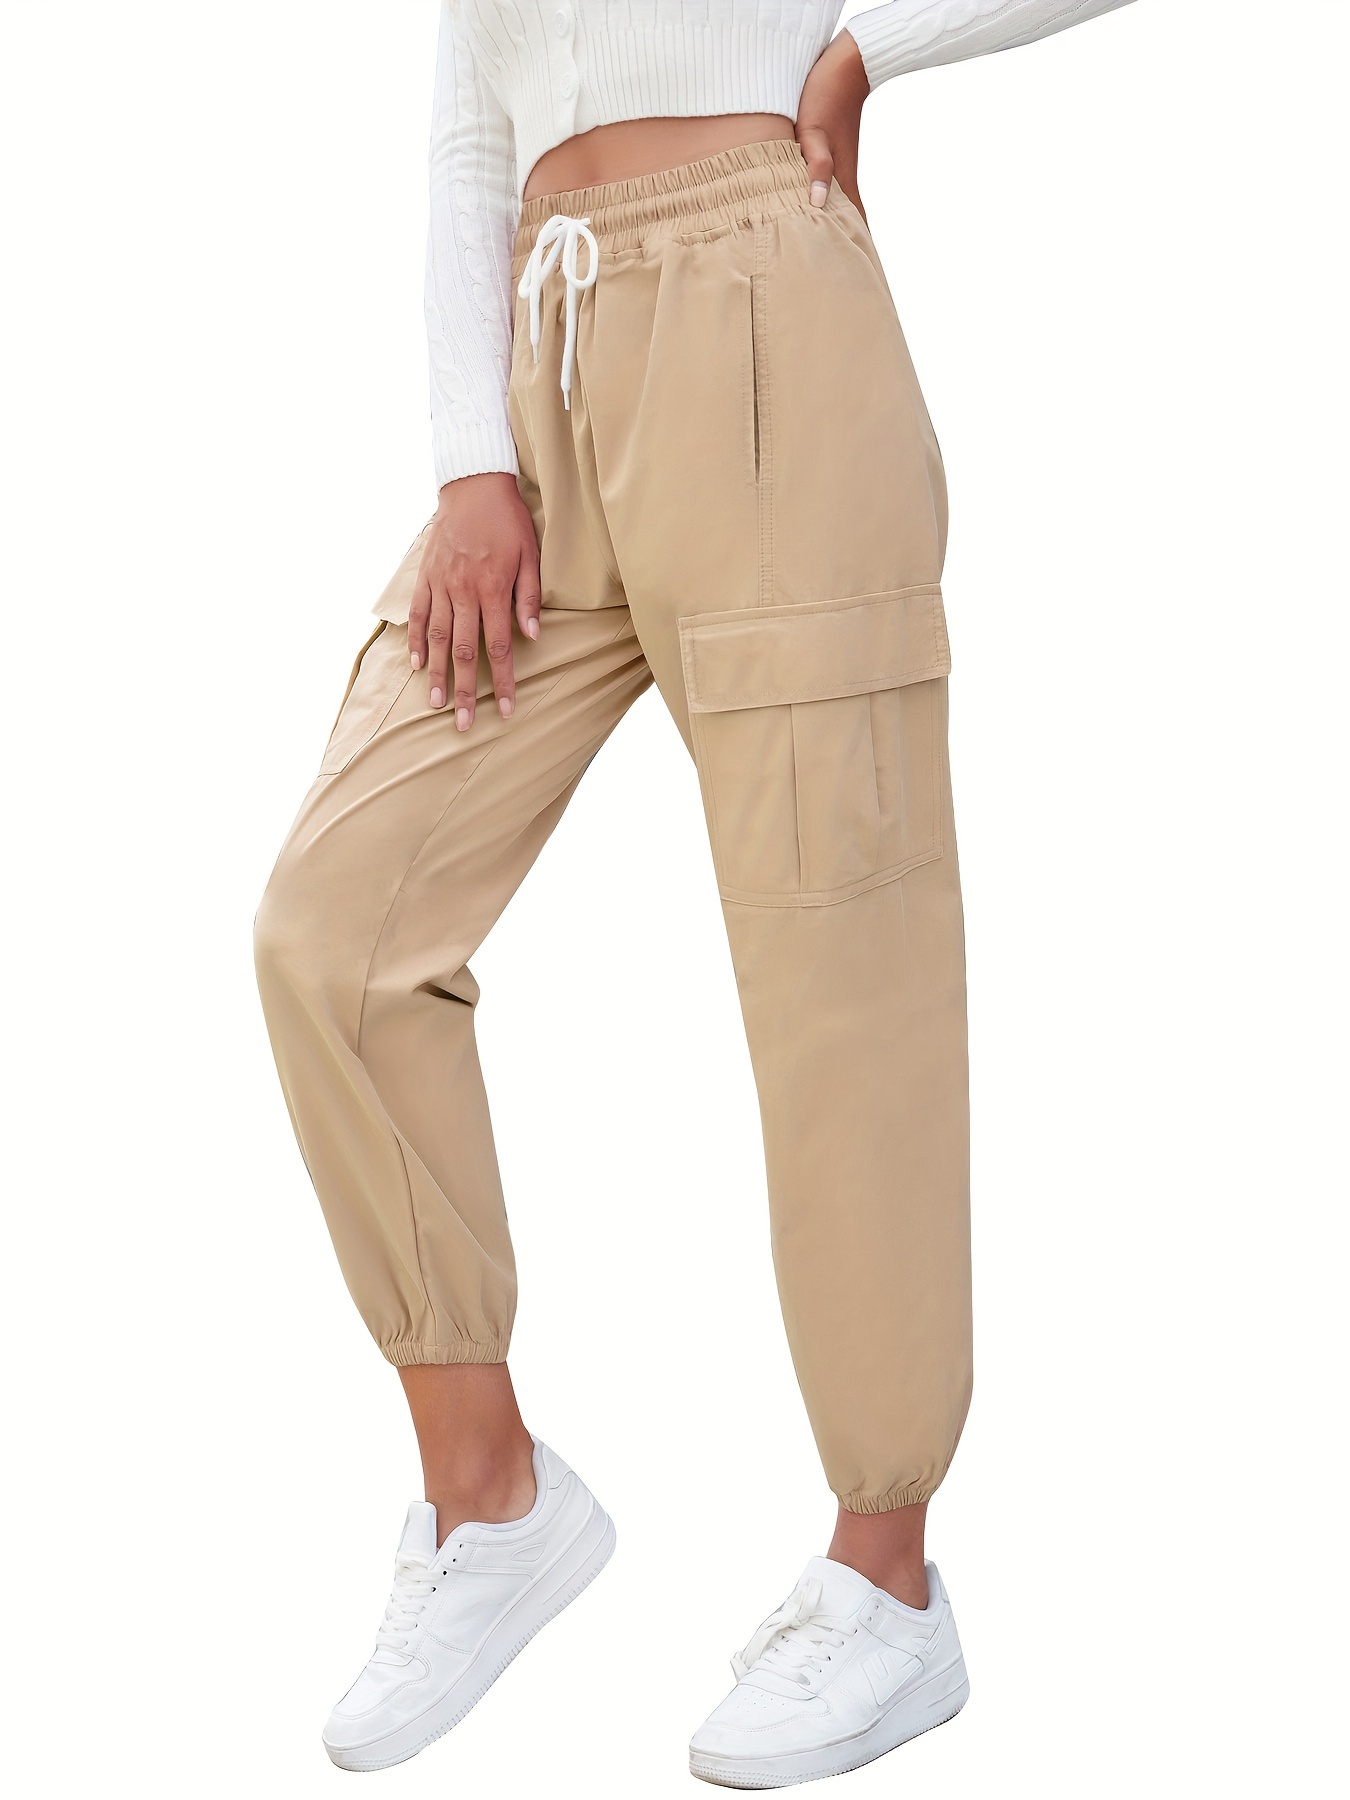 nsendm Female Pants Adult Womens Pants Casual Work Size 16 Womens Pants  Pockets Oversized Loose Elastic Sports Women Cargo Pants with(Black, M)